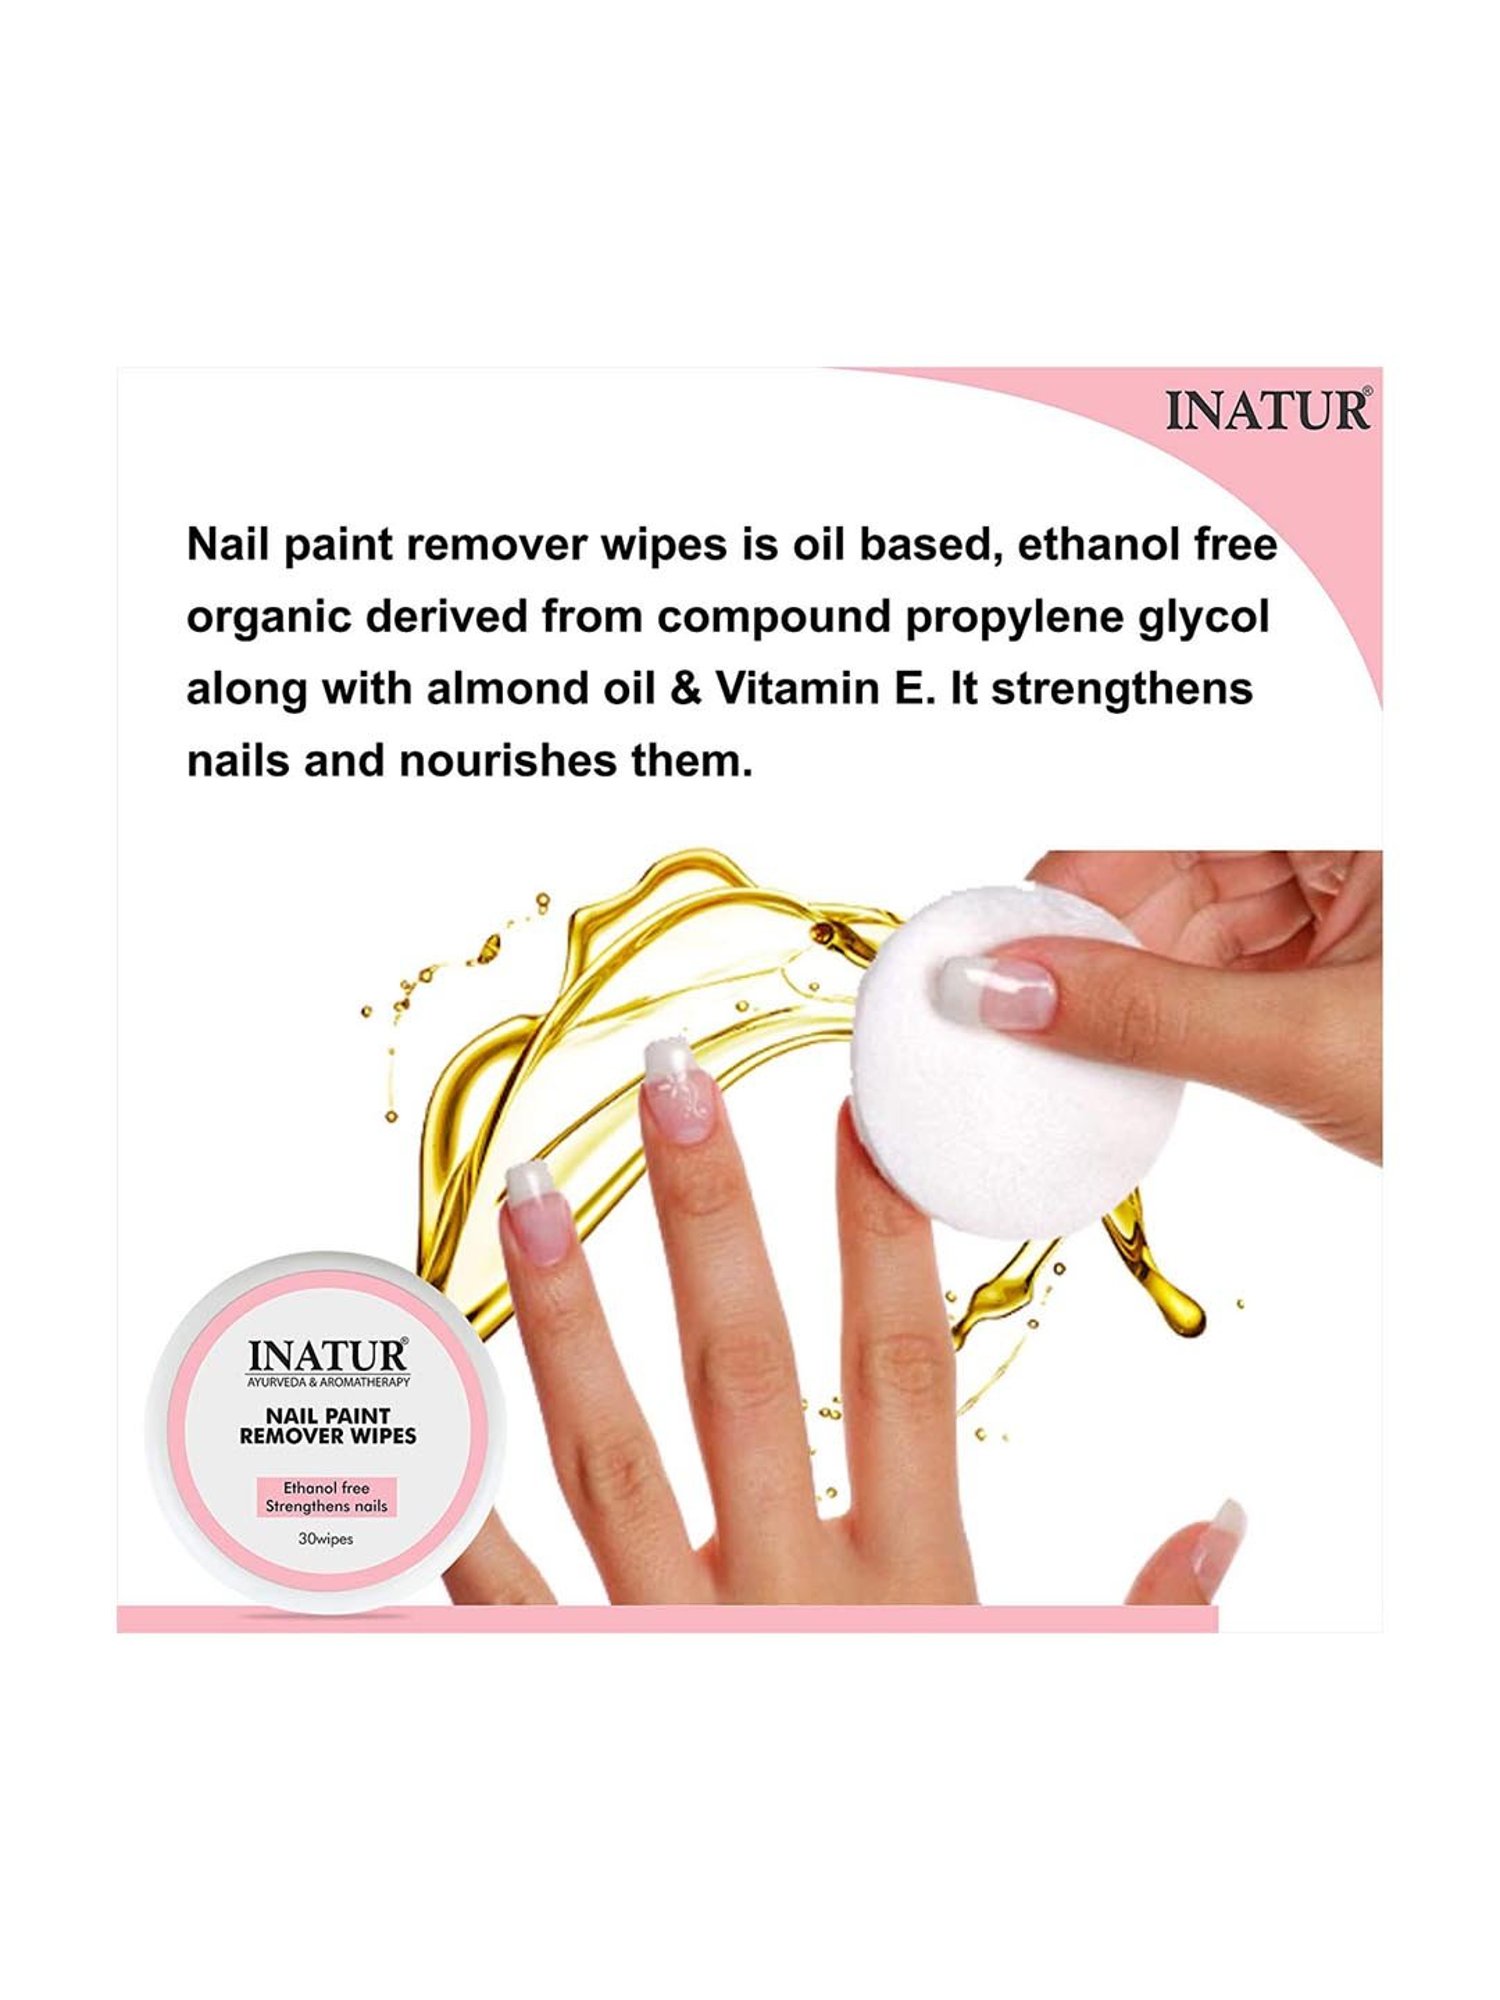 Buy Calitate24 (96 Pads / 3 Box) Nail Polish Remover Pads Multi-Fruit  Flavored Nail Paint Remover Wipes Wet Tissue with 1 Nail Filer Online at  Low Prices in India - Amazon.in